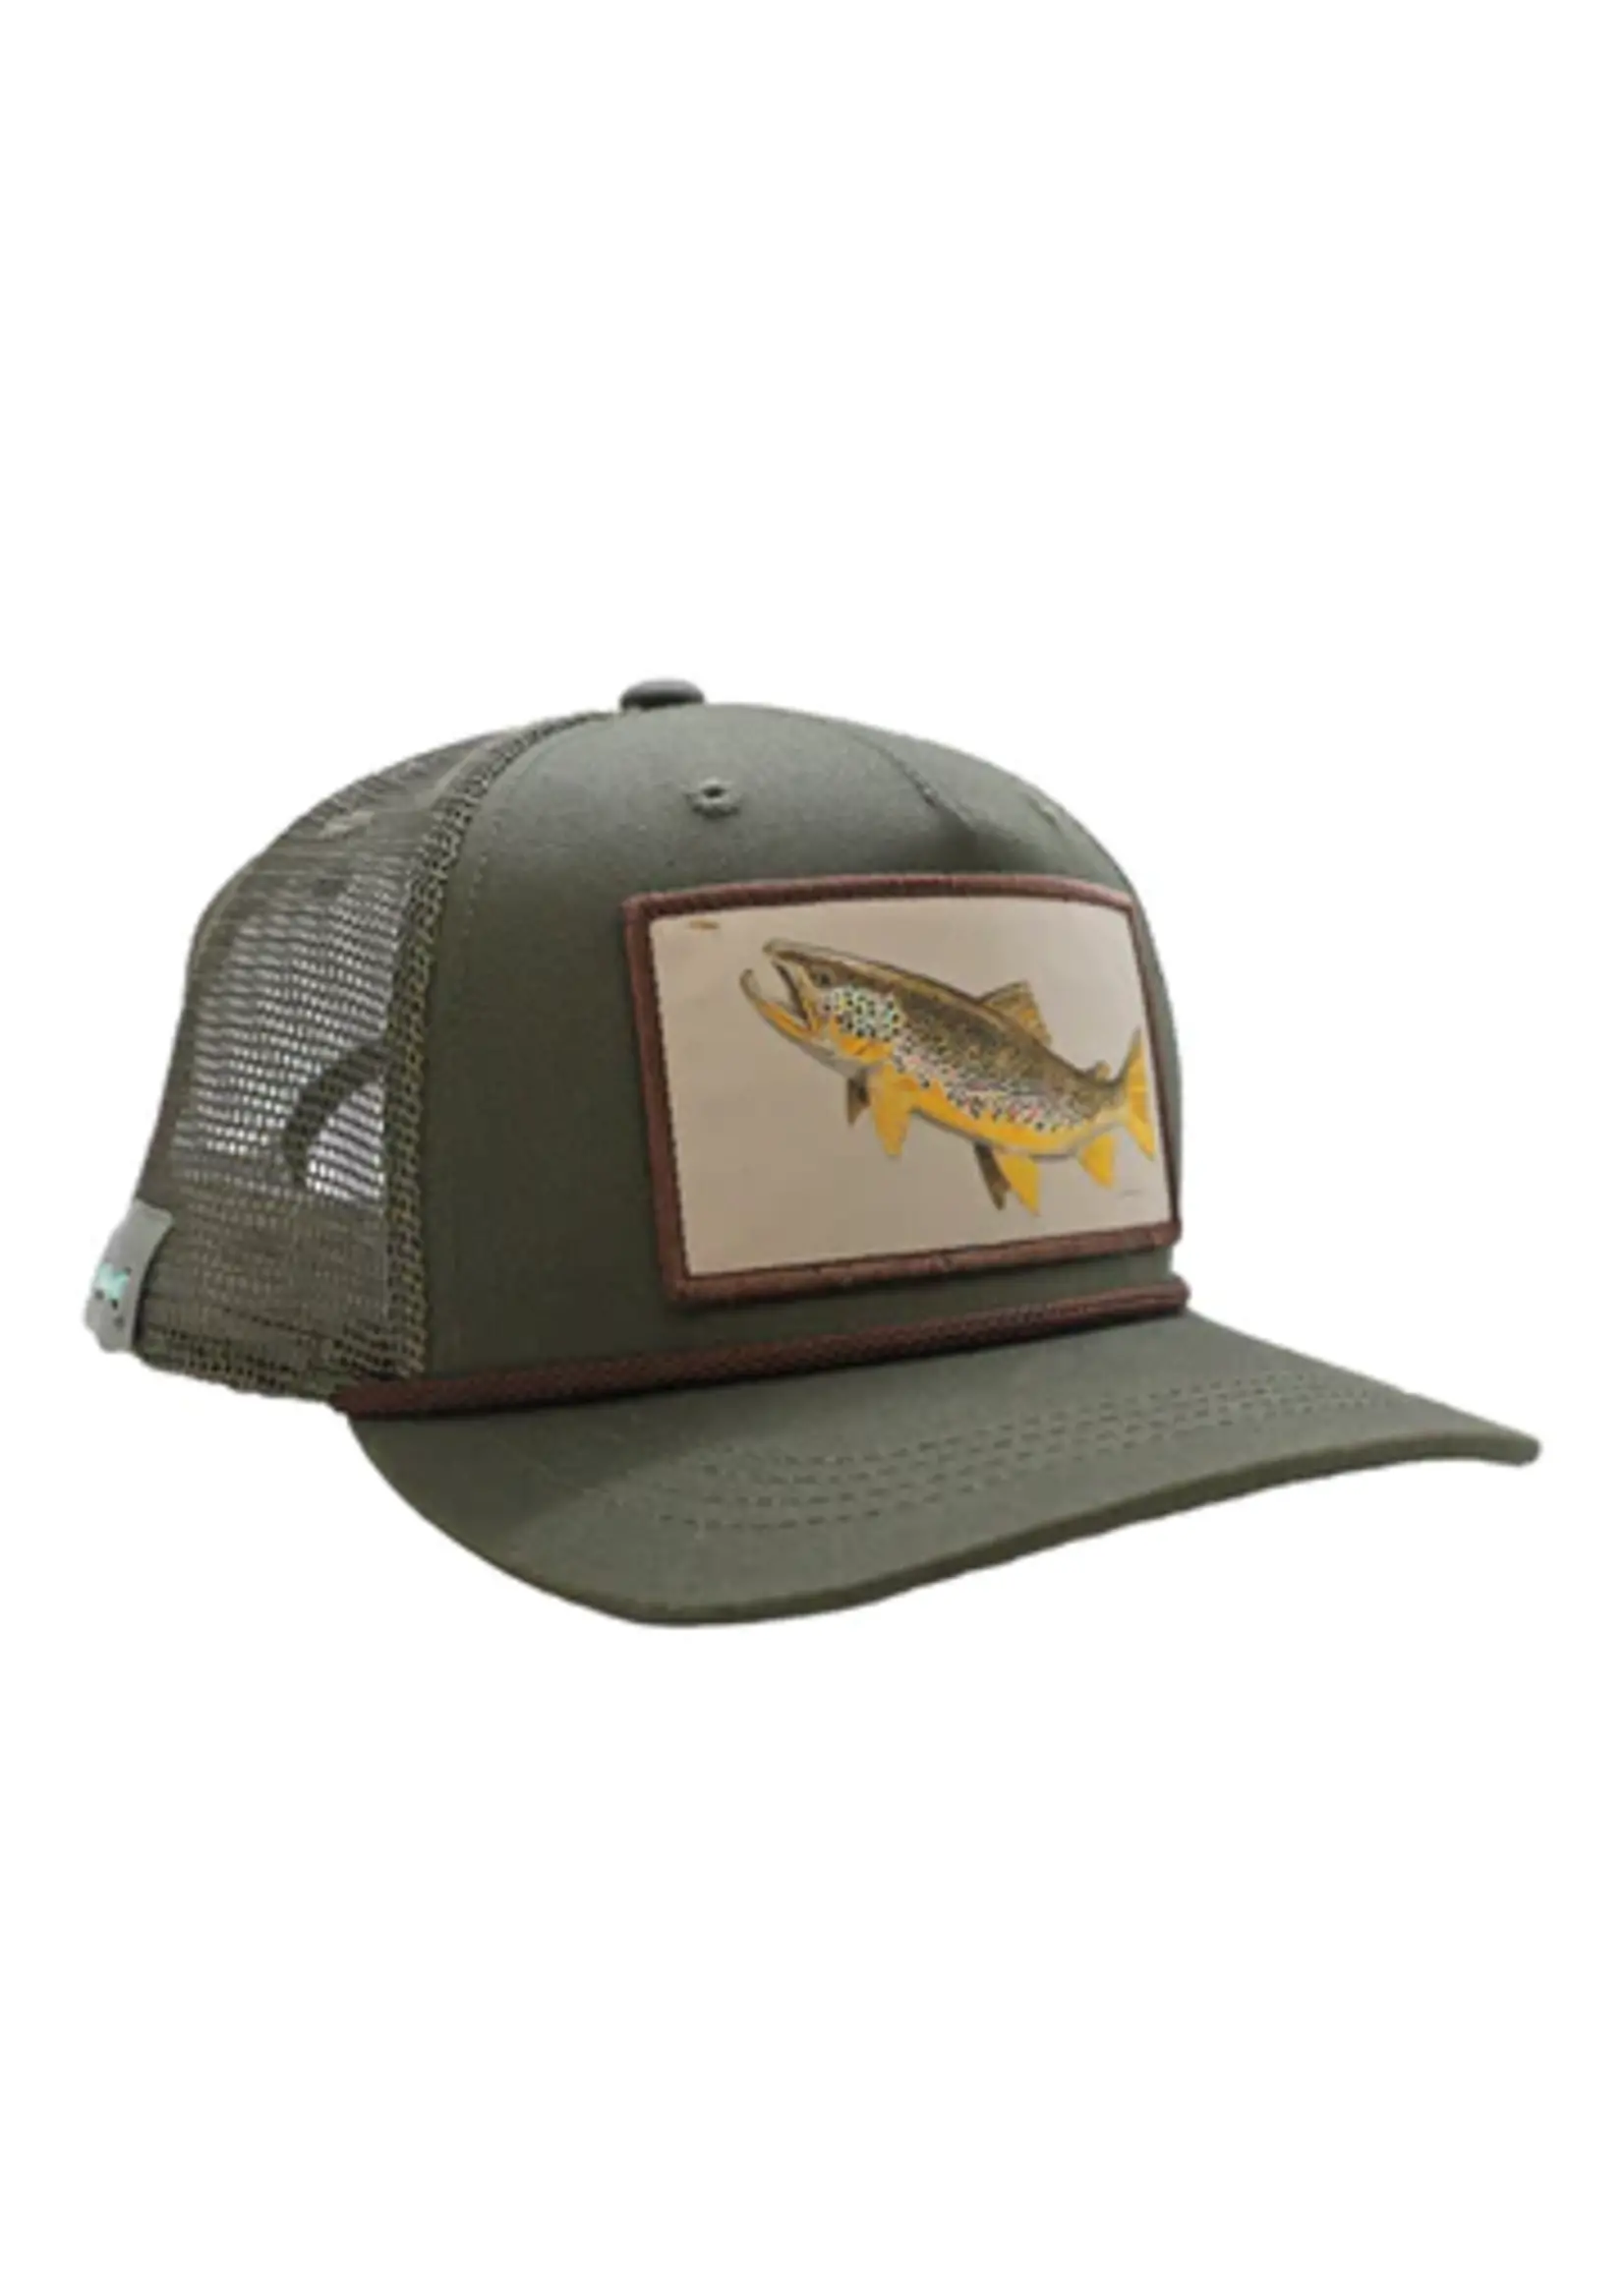 Rep Your Water RepYourWater Hungry Brown Hat